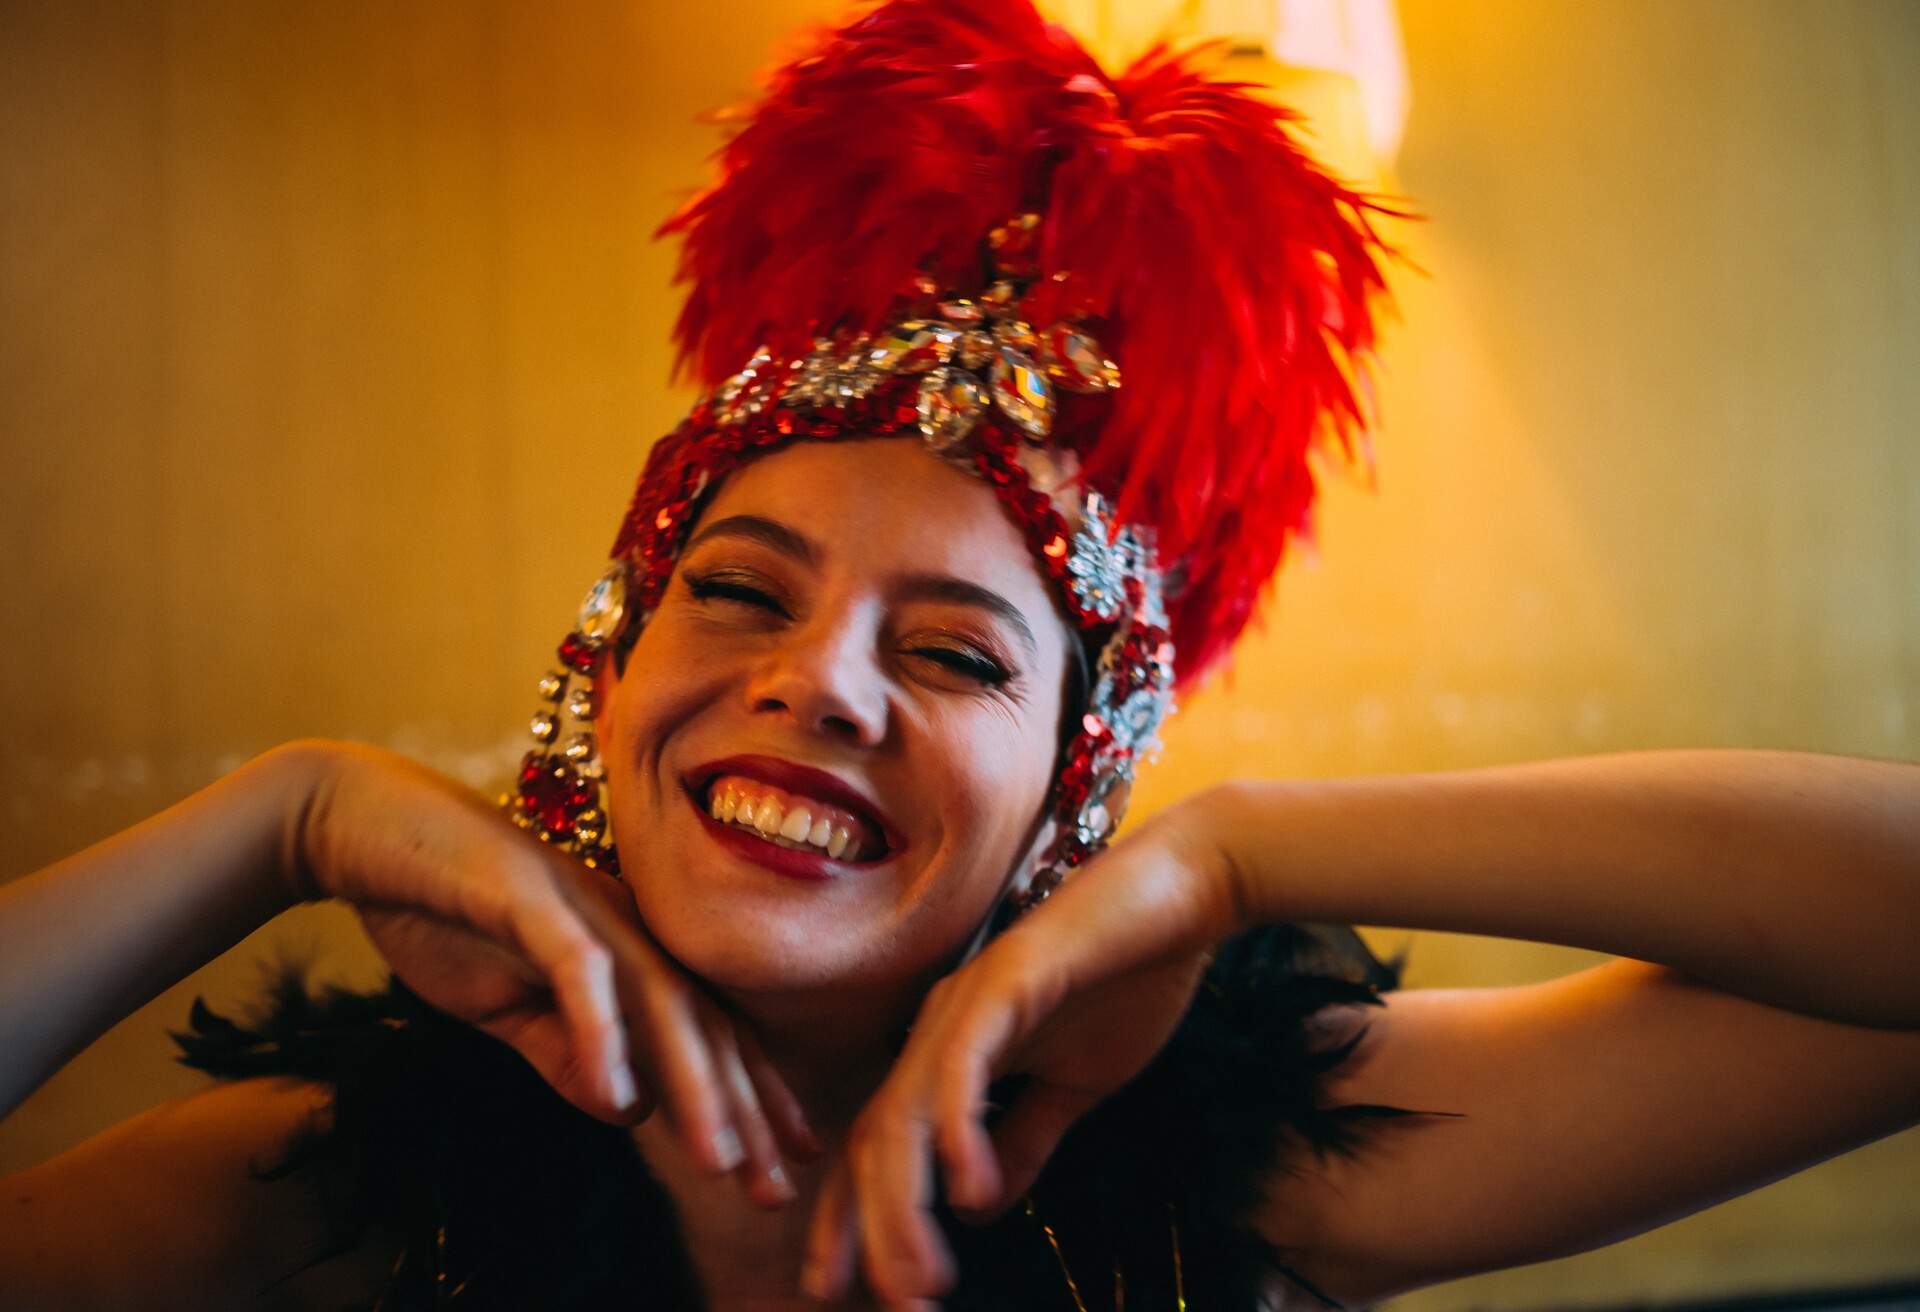 A person with a red feathered headpiece and black feathered top smiles happily.